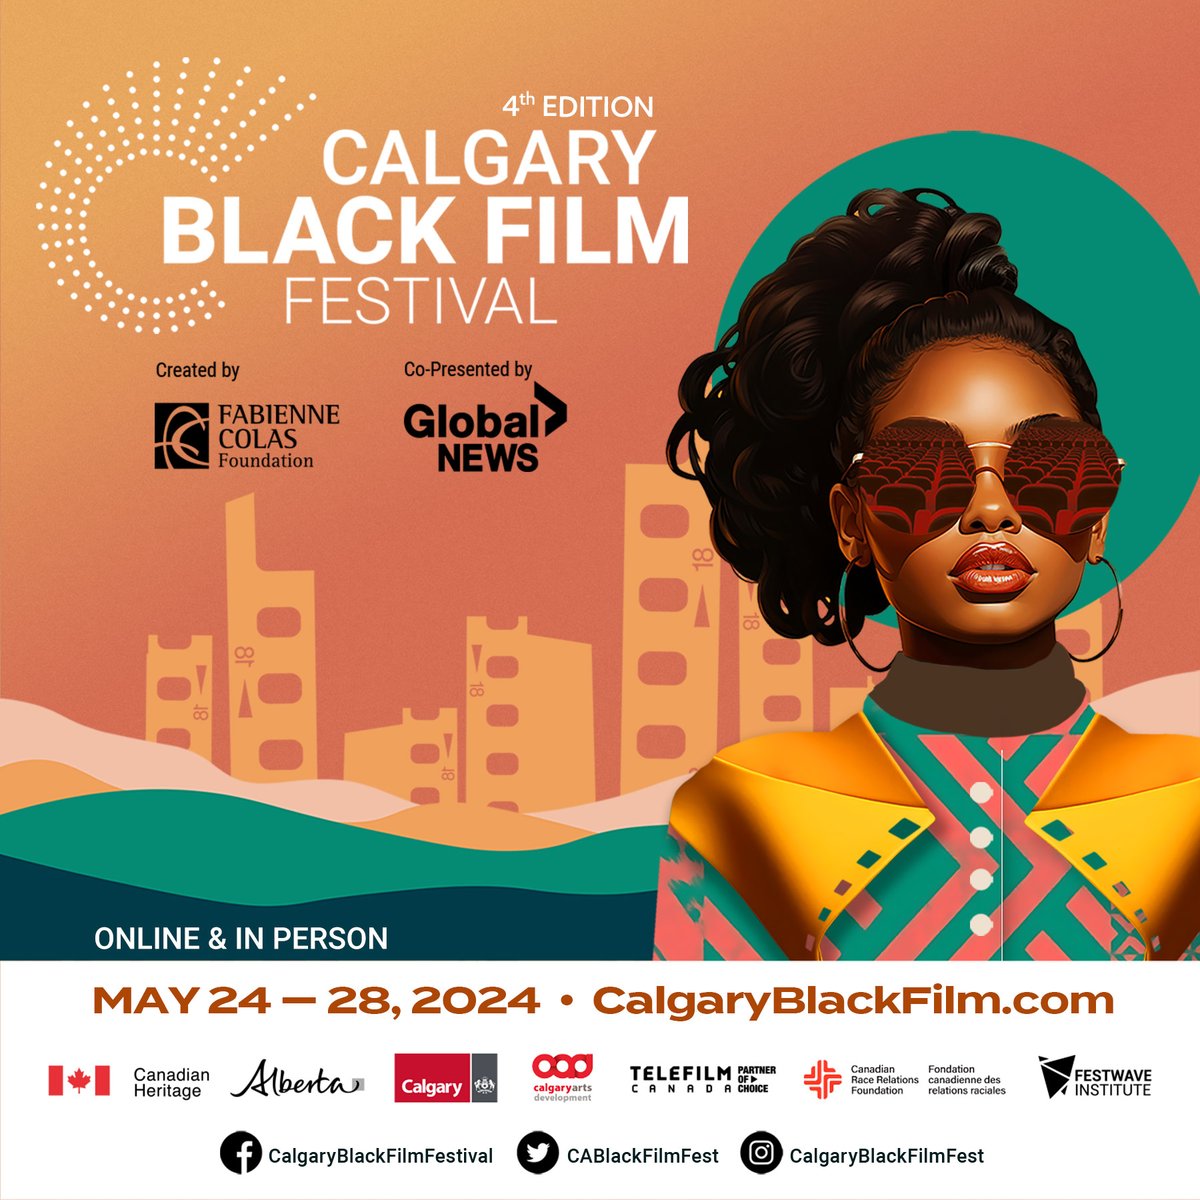 This year's @CABlackFilmFest begins Friday, May 24! Experience films, panel discussions, and workshops amplifying Black voices and perspectives. Get your tickets and passes at calgaryblackfilm.com.